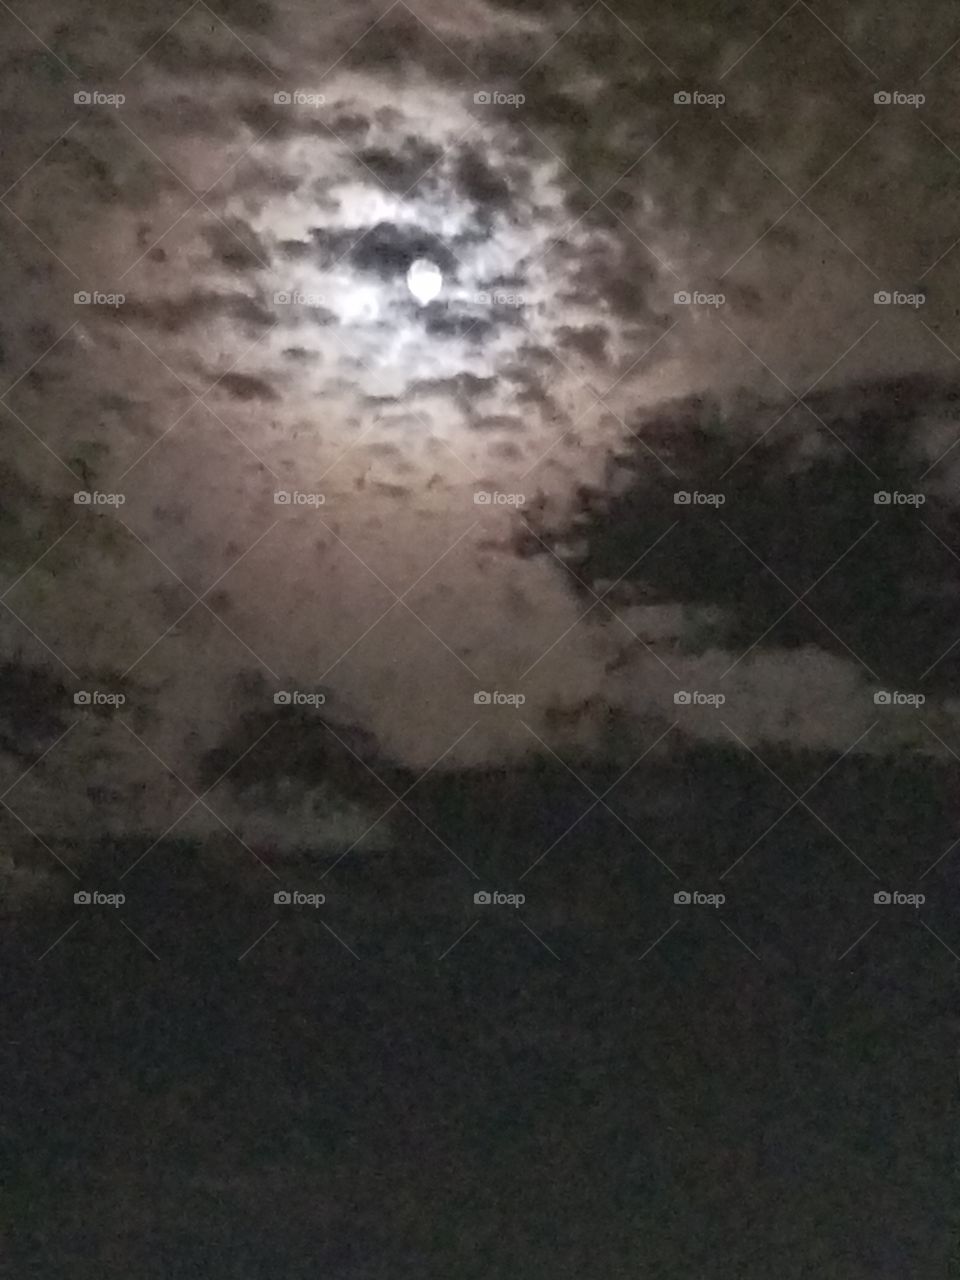 Super moon in the cloudy sky over Texas